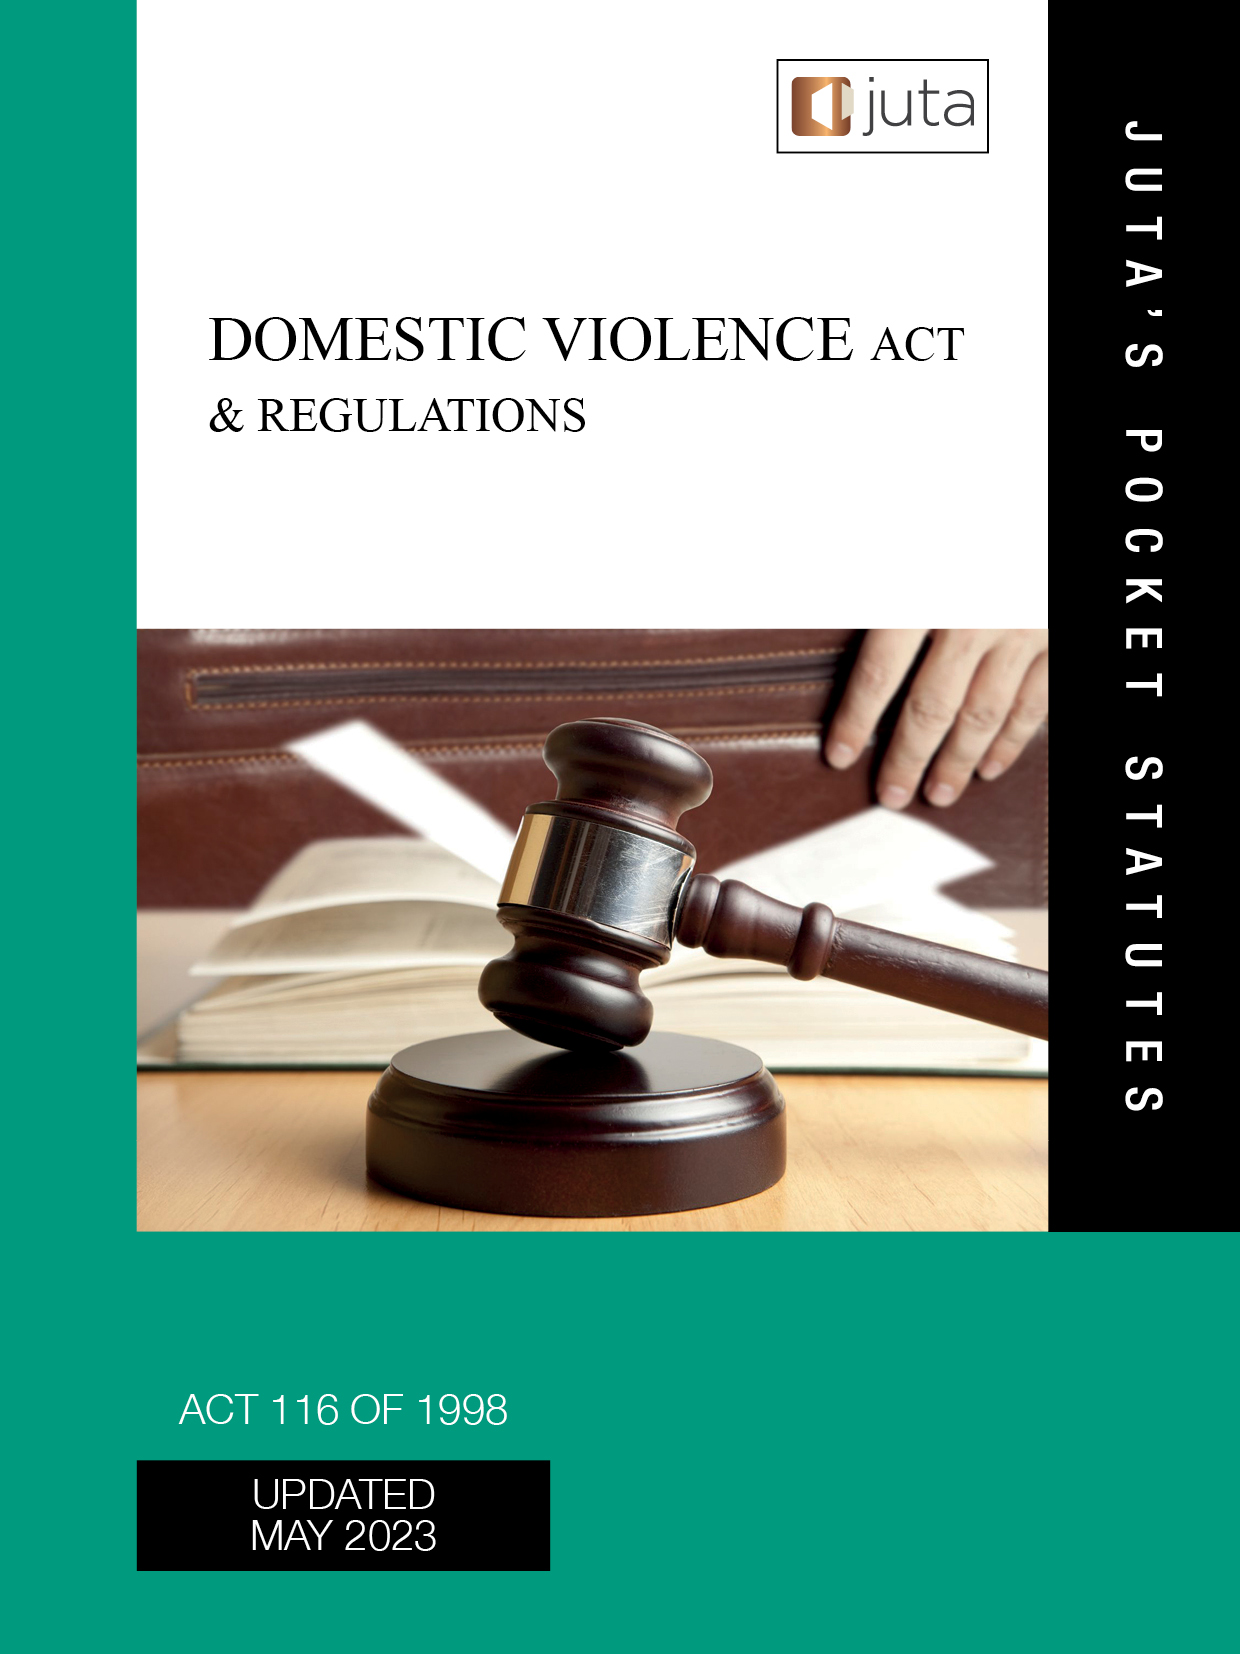 Domestic Violence Act 116 of 1998 & Regulations